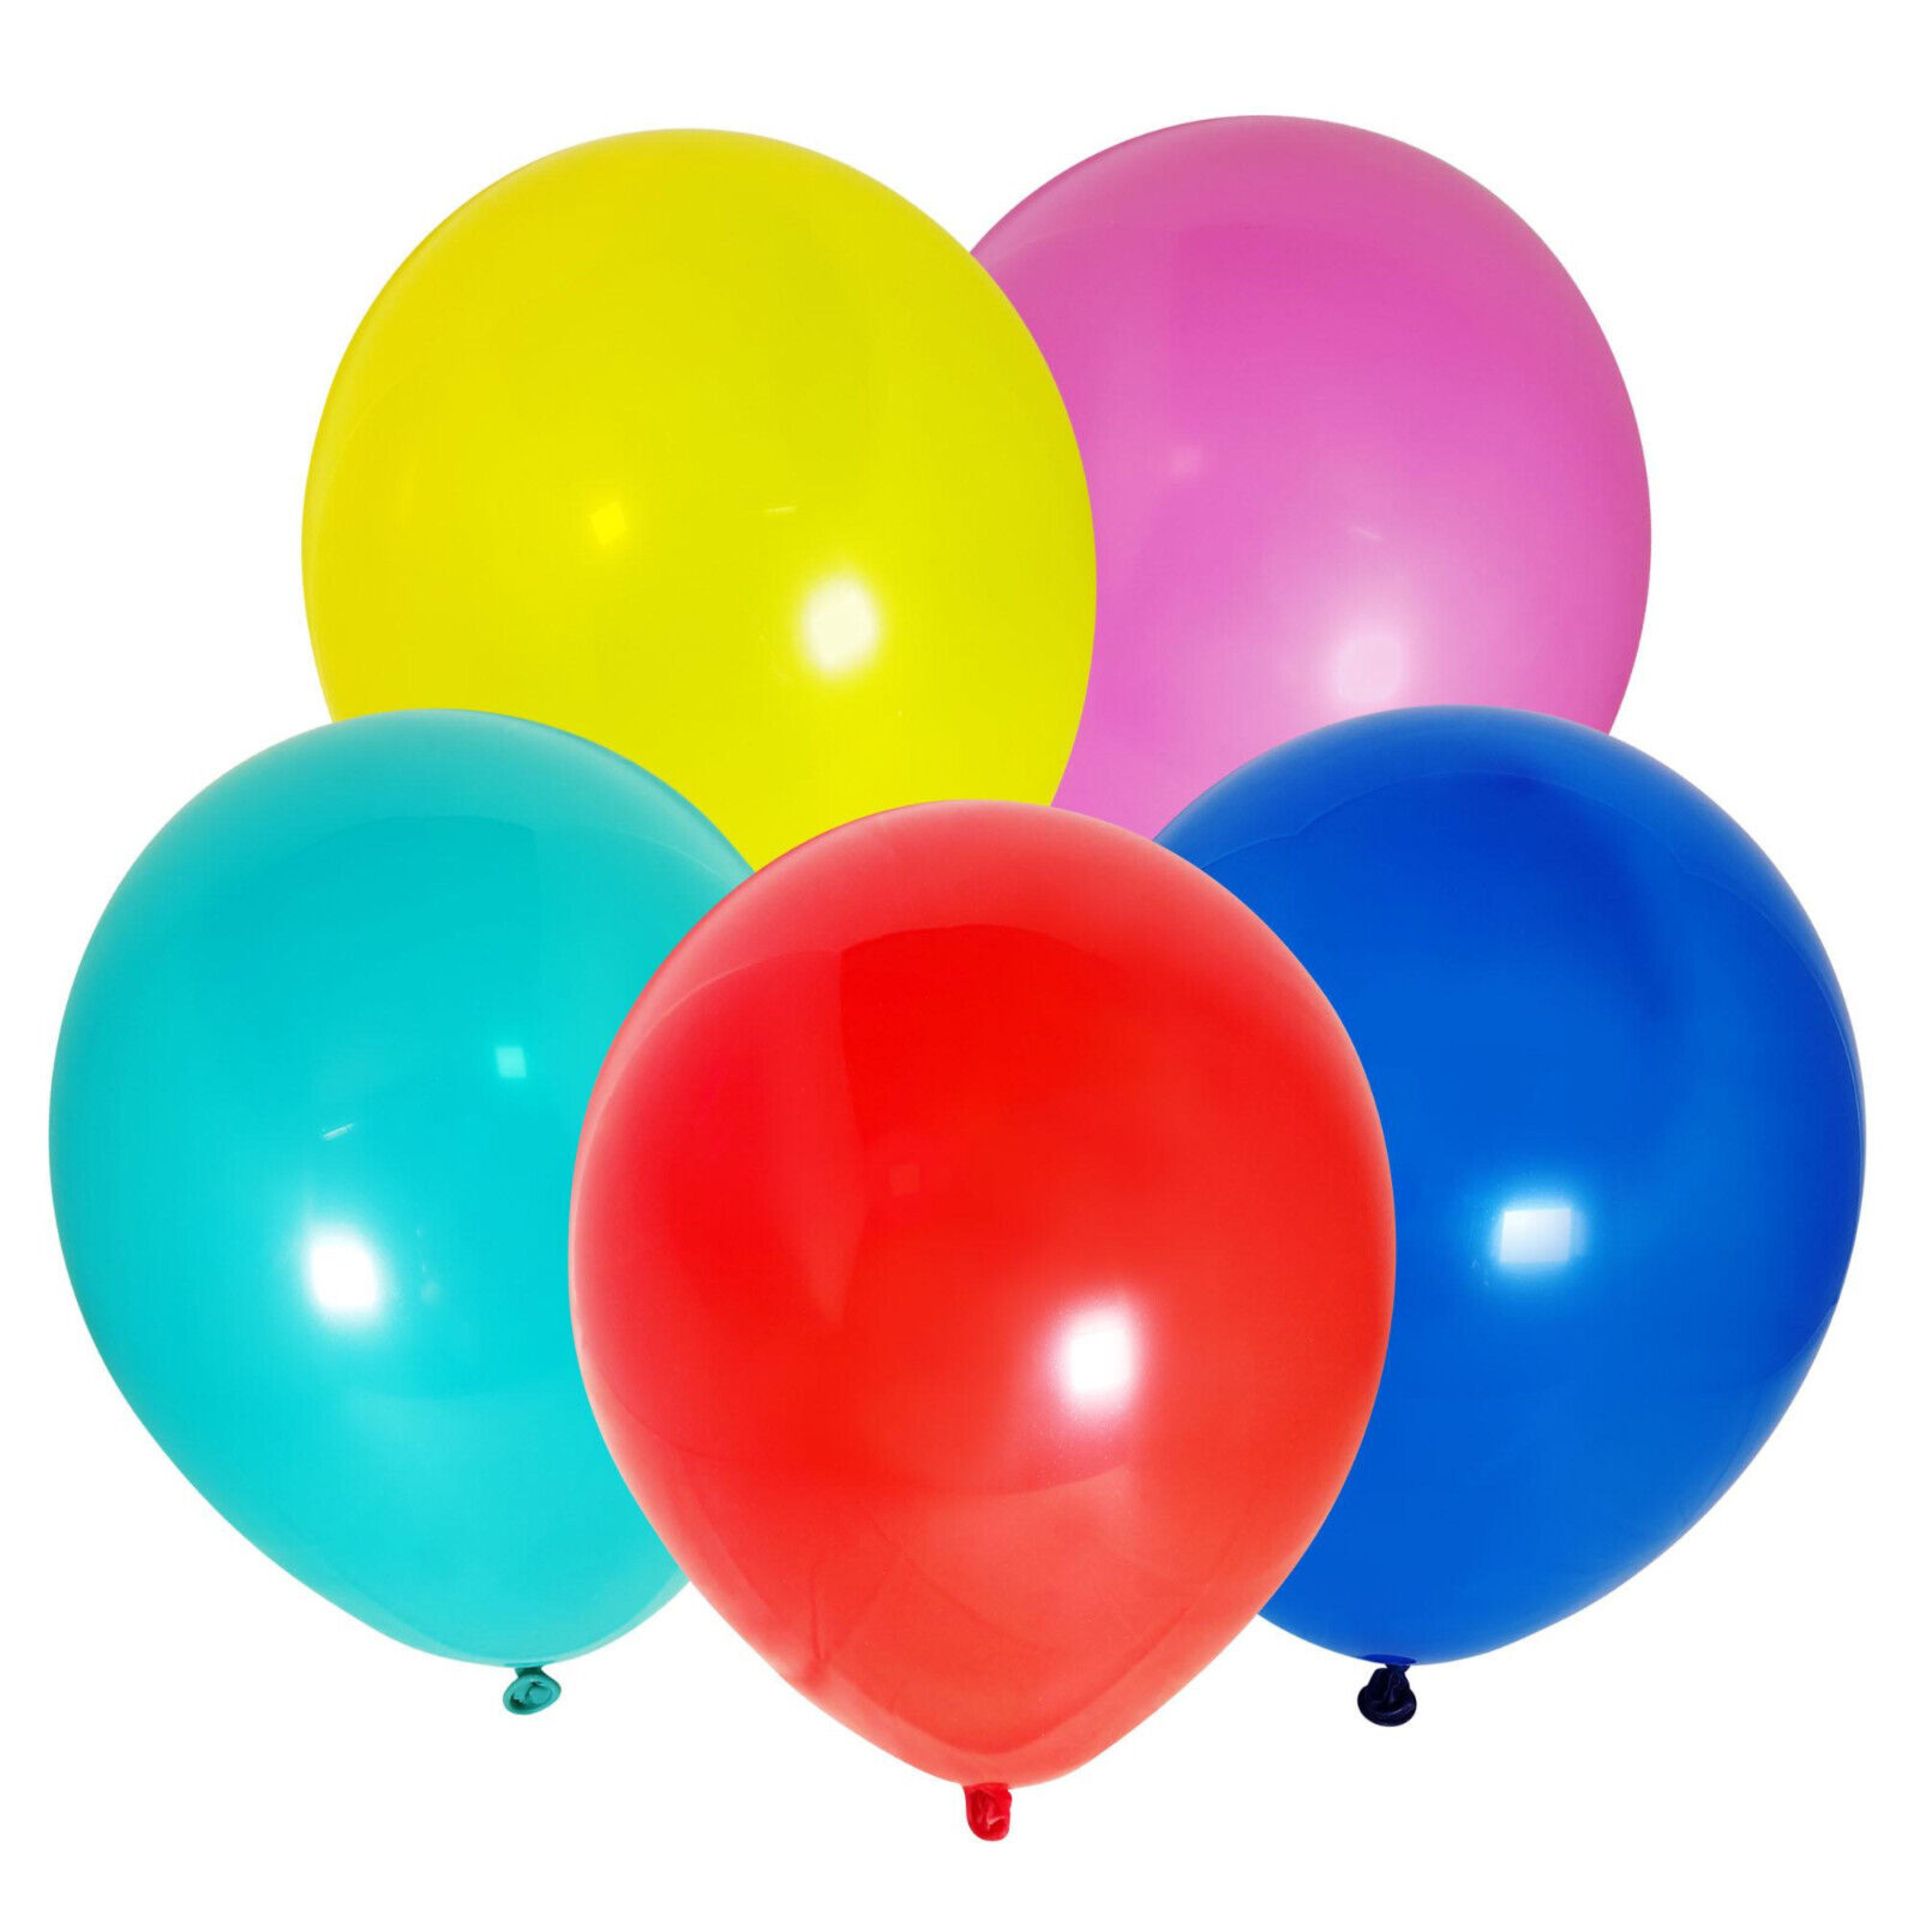 1000 X NEW 9"&6" - 24 PACK ASSORTED COLOURED BALLOONS - Image 4 of 4